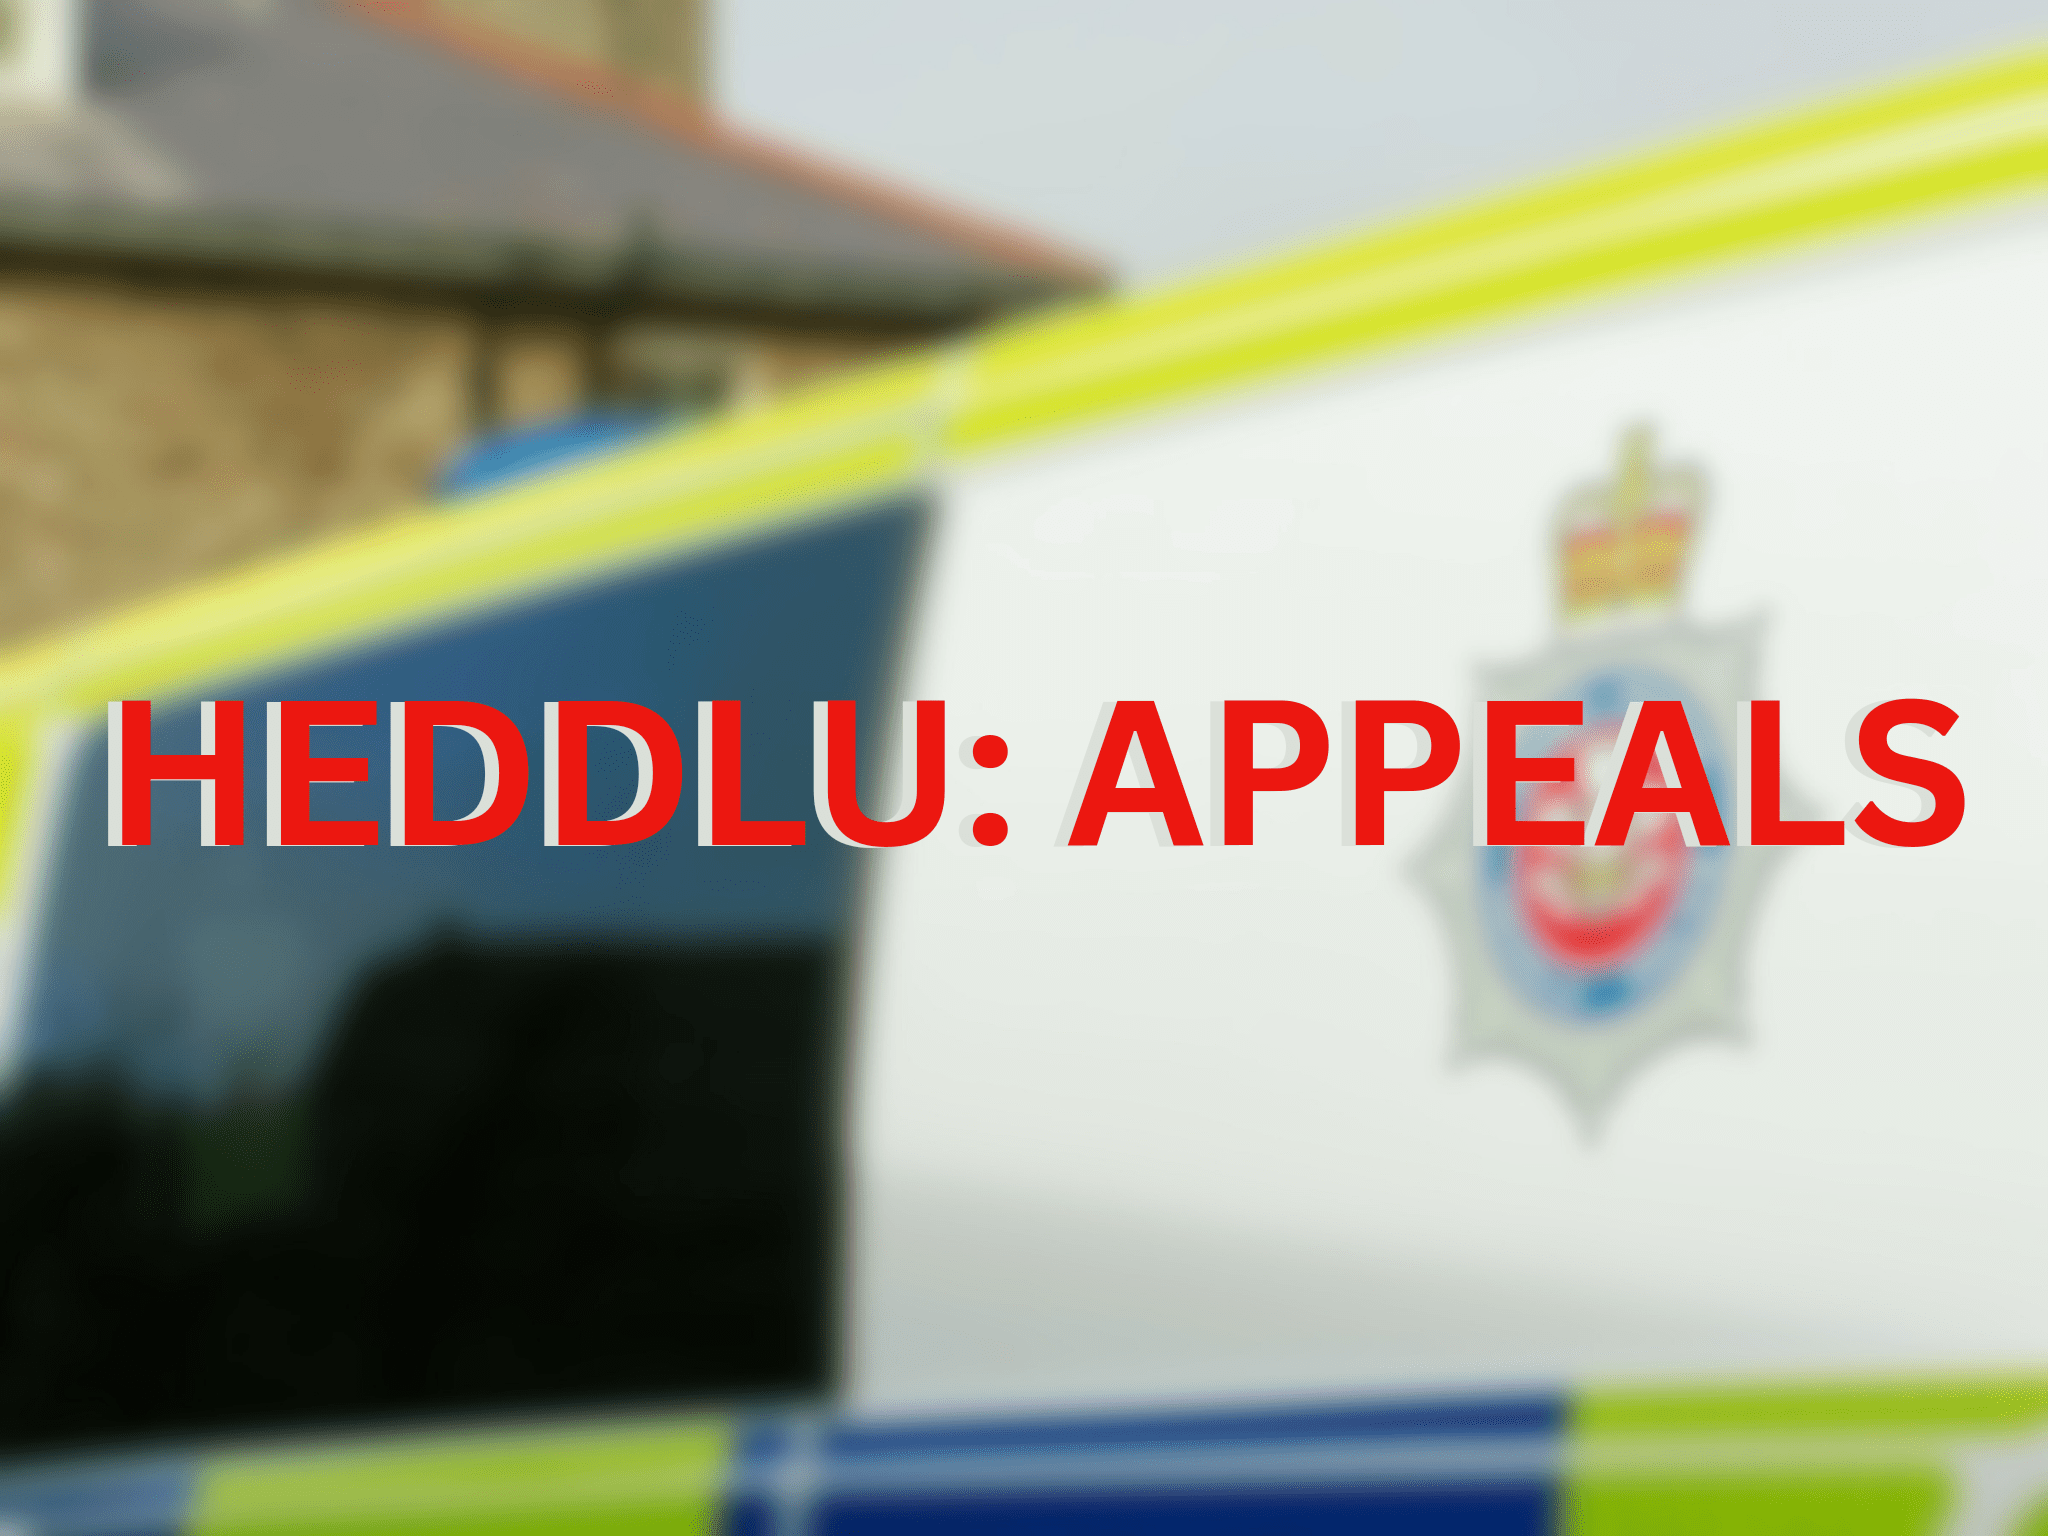 Police appeal for witnesses following damage to De-Fib box in Llangennech